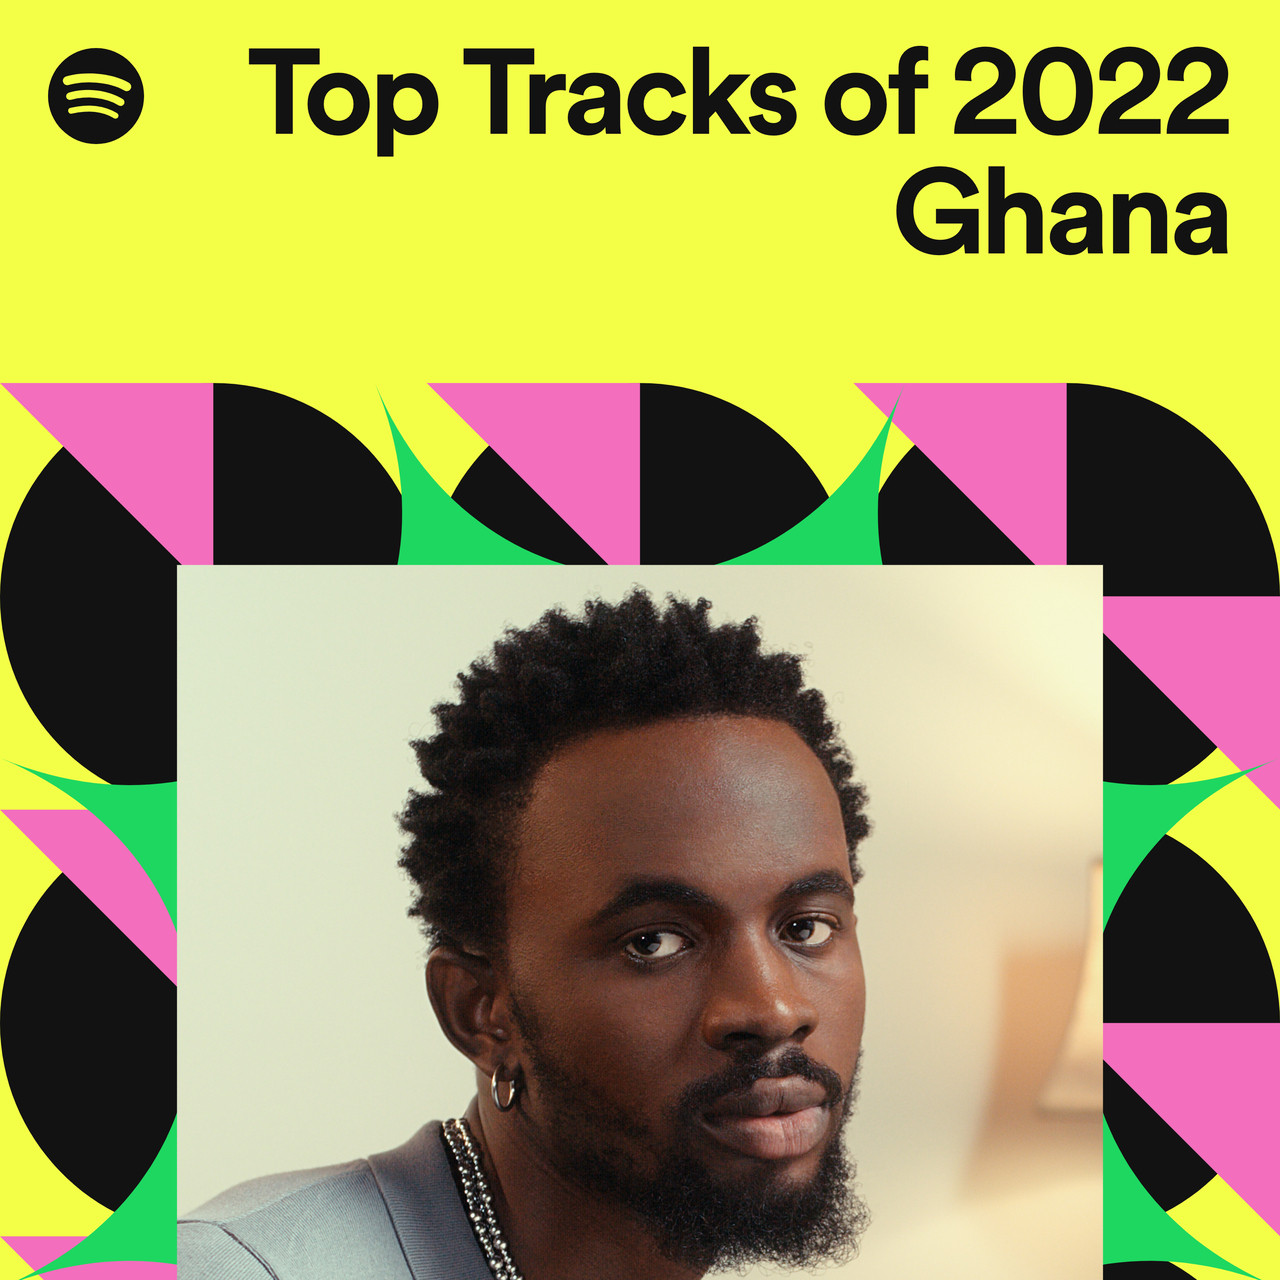 Spotify Wrapped: What are Ghanaians listening to in 2022?